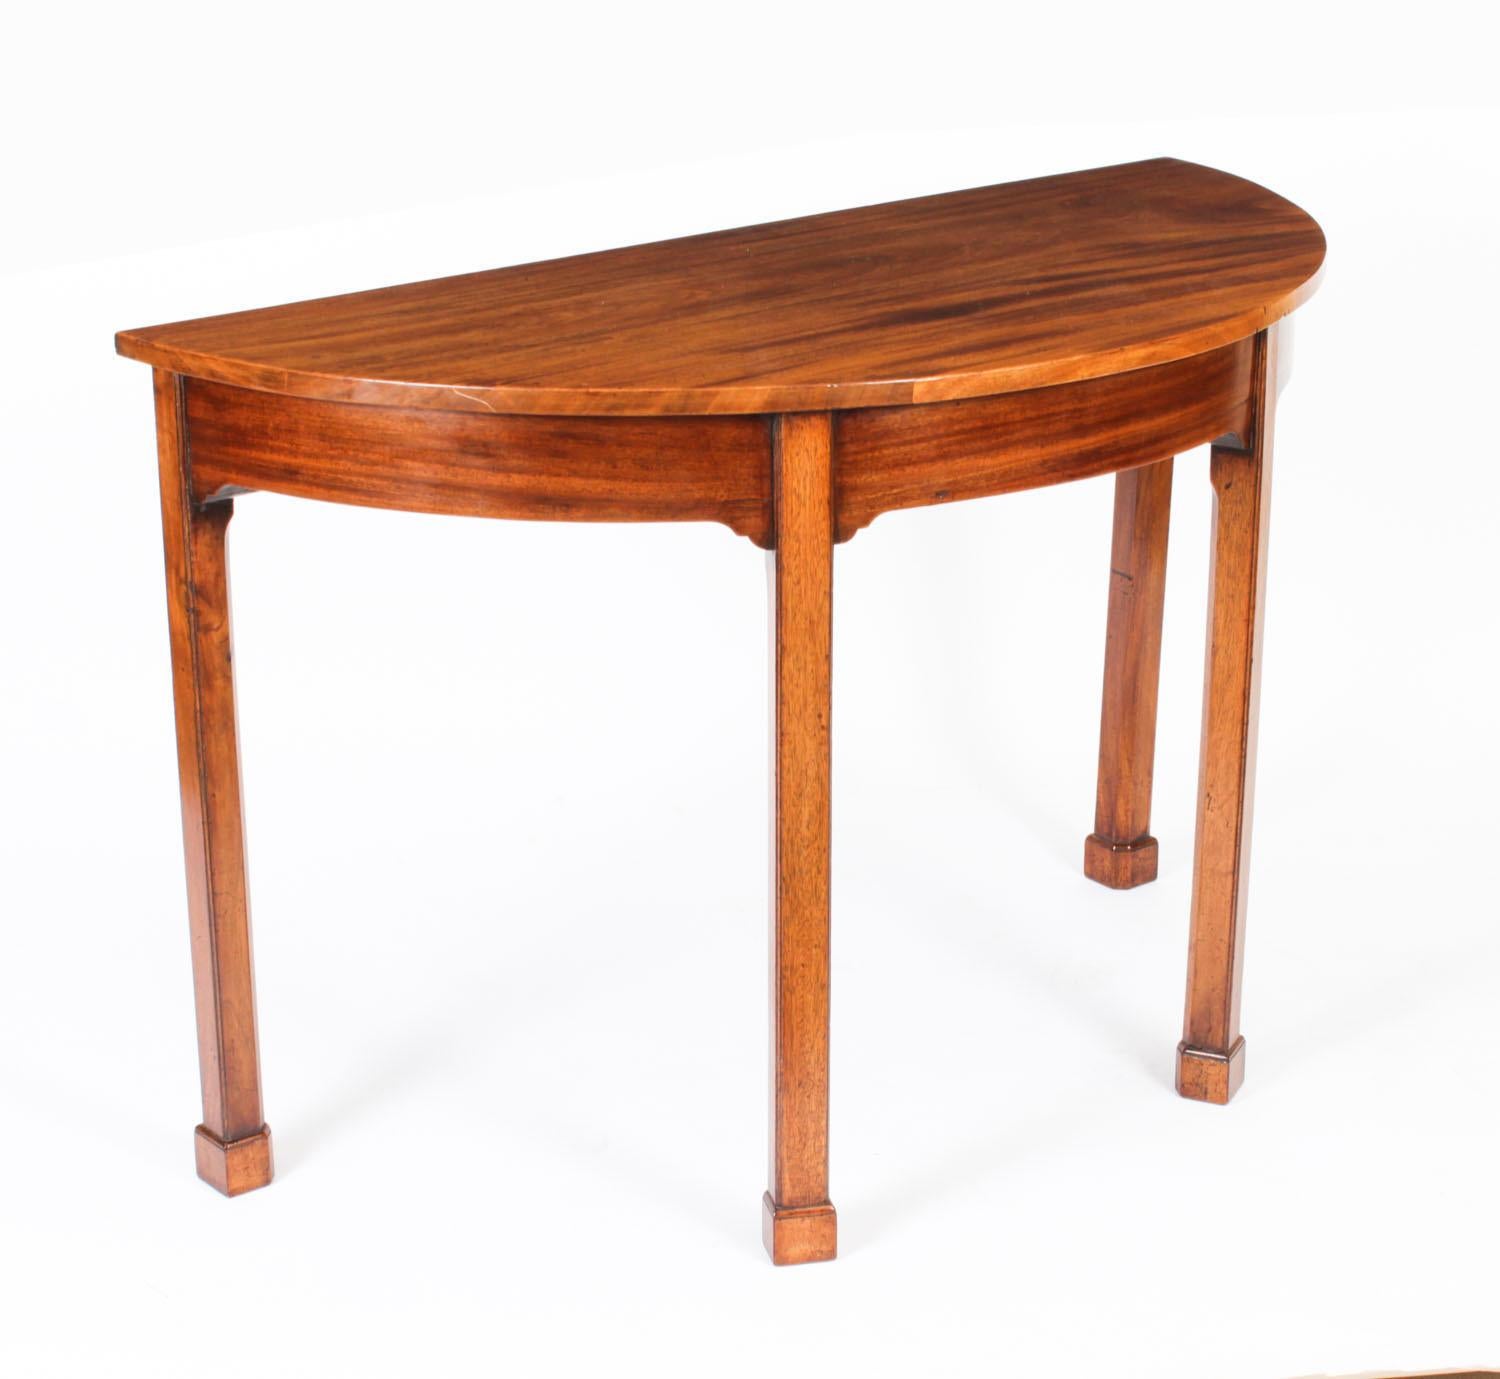 This is a superb pair of antique George III solid fruitwood demi-lune console tables, possibly Anglo Chinese, circa 1780 in date.

Each console has a beautiful half moon shaped top and they are each raised on elegant square tapering legs that